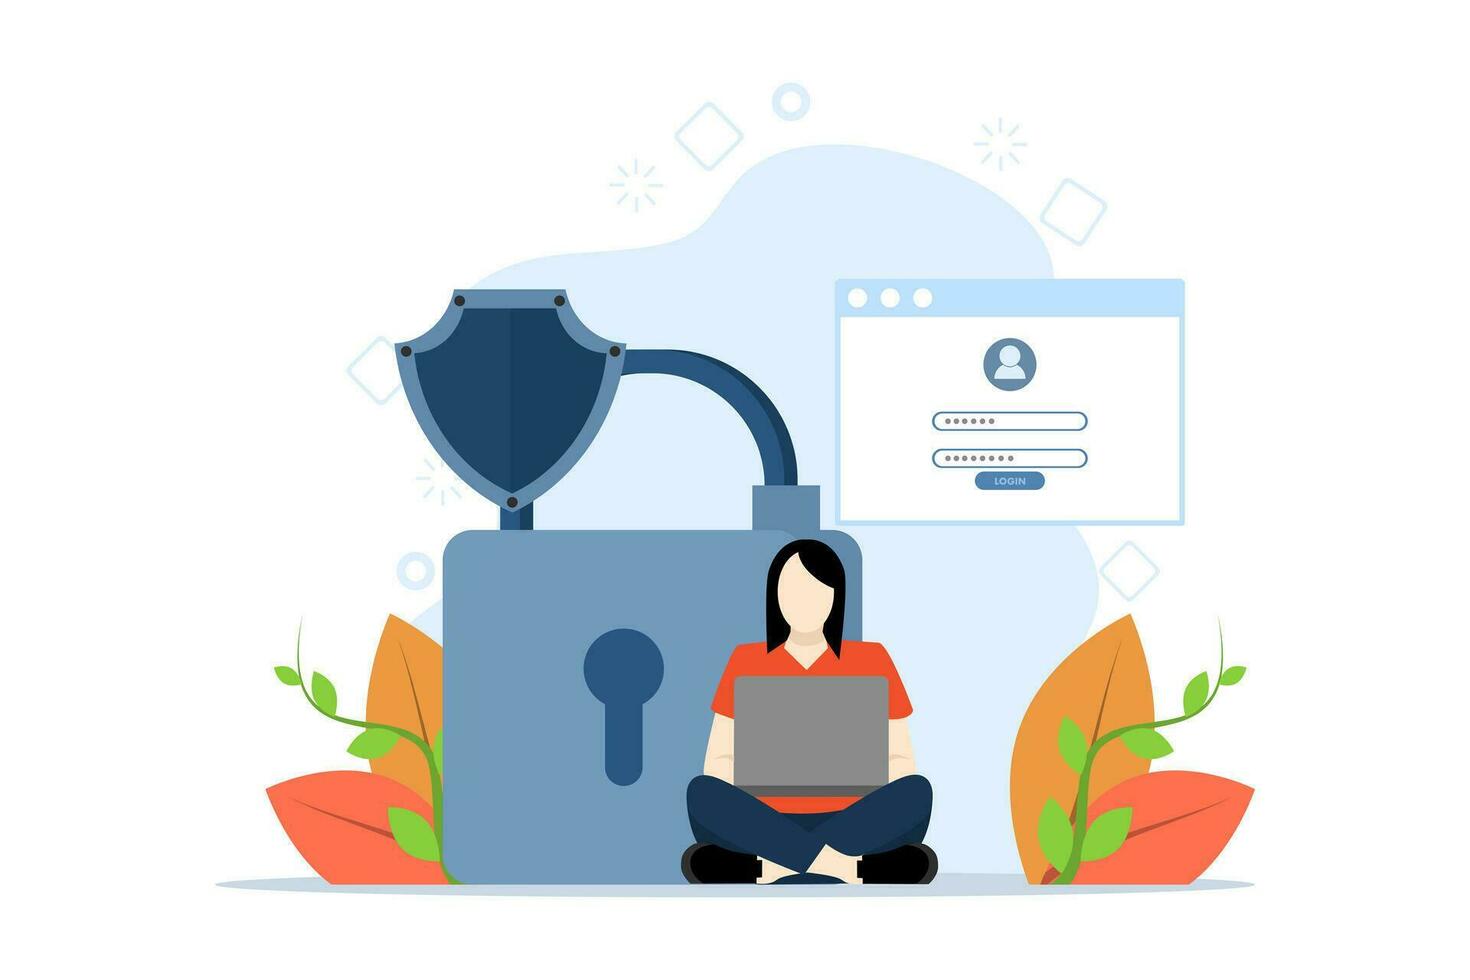 Concept of terms and conditions, privacy policy, user consent, remote transaction, personal data protection, Woman sitting in front of lock with laptop. flat vector illustration on a white background.